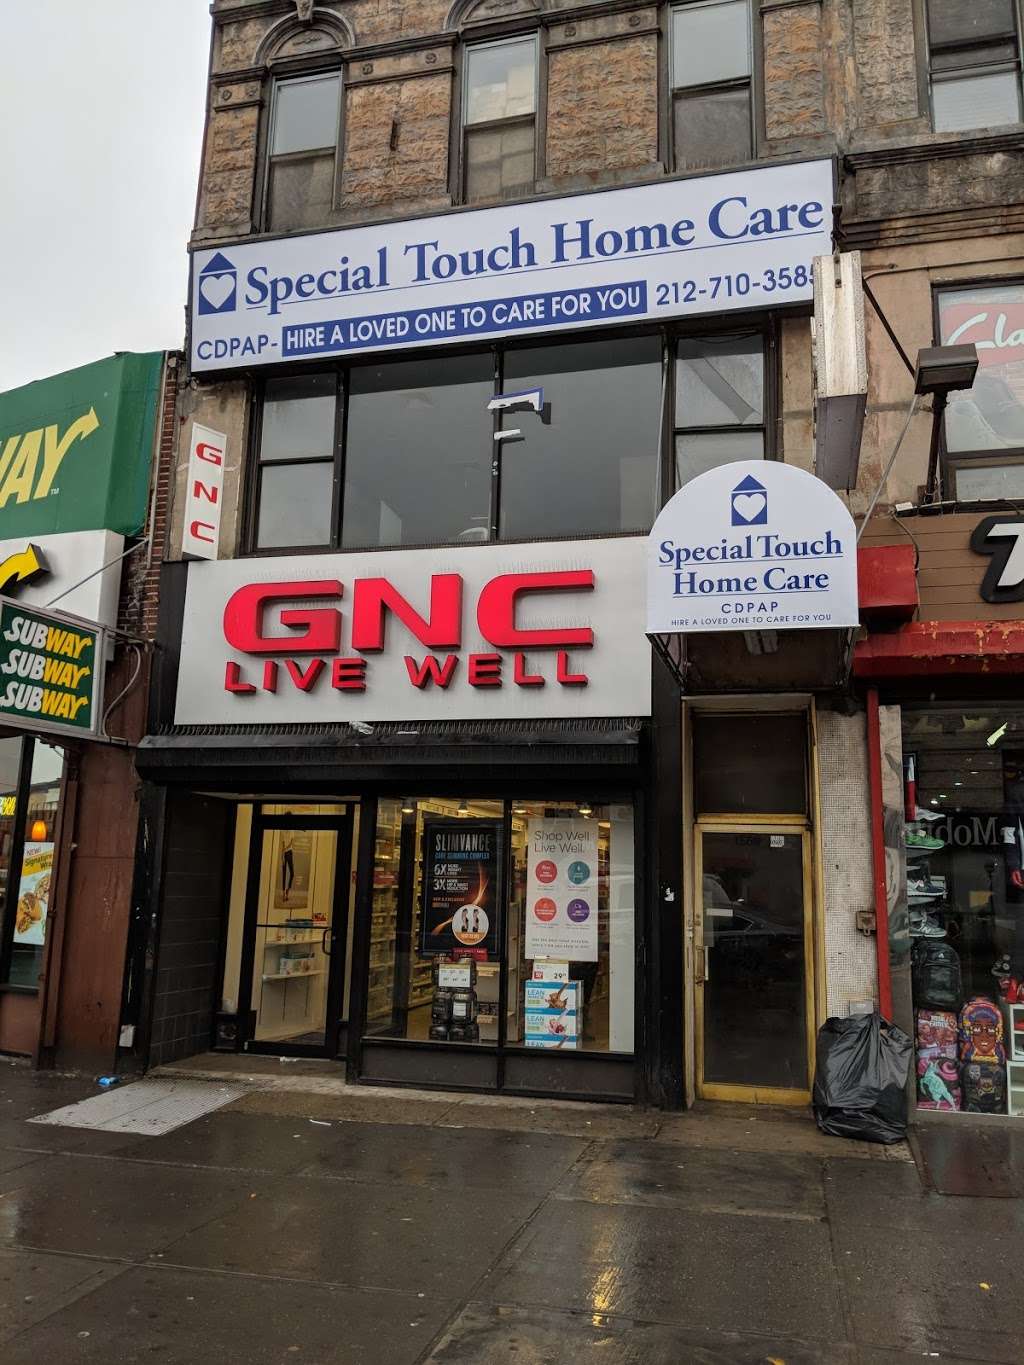 Special Touch Home Care - CDPAP and HHA Services - Brooklyn (Fla | 1569 Flatbush Ave 2nd floor, Brooklyn, NY 11210 | Phone: (212) 710-3585